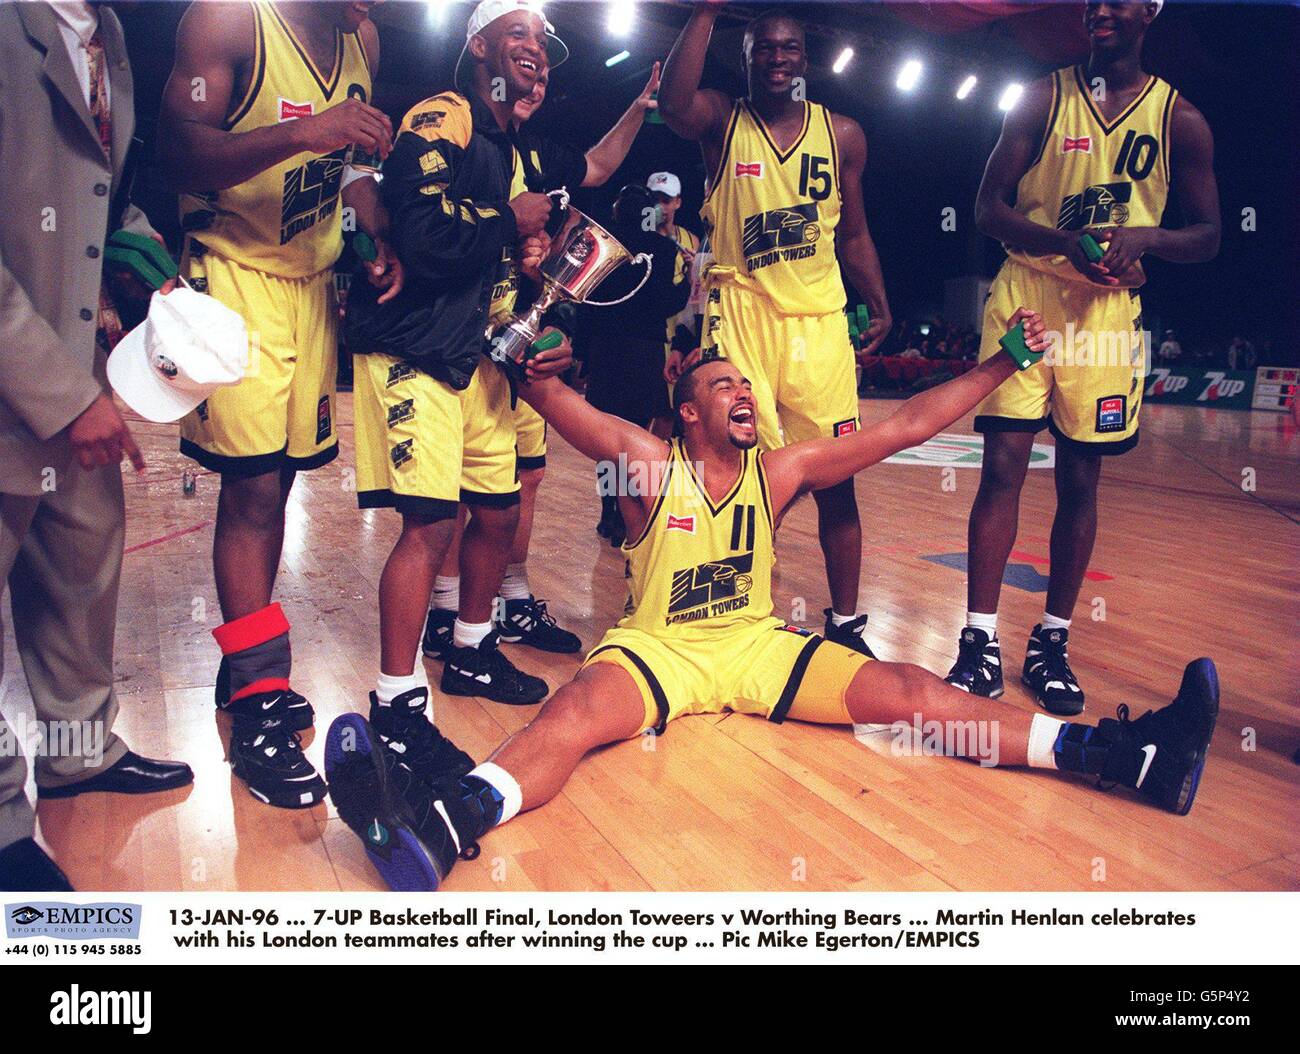 13-JAN-96, 7-UP Basketball Final, London Toweers v Worthing Bears, Martin Henlan celebrates with his London teammates after winning the cup Stock Photo